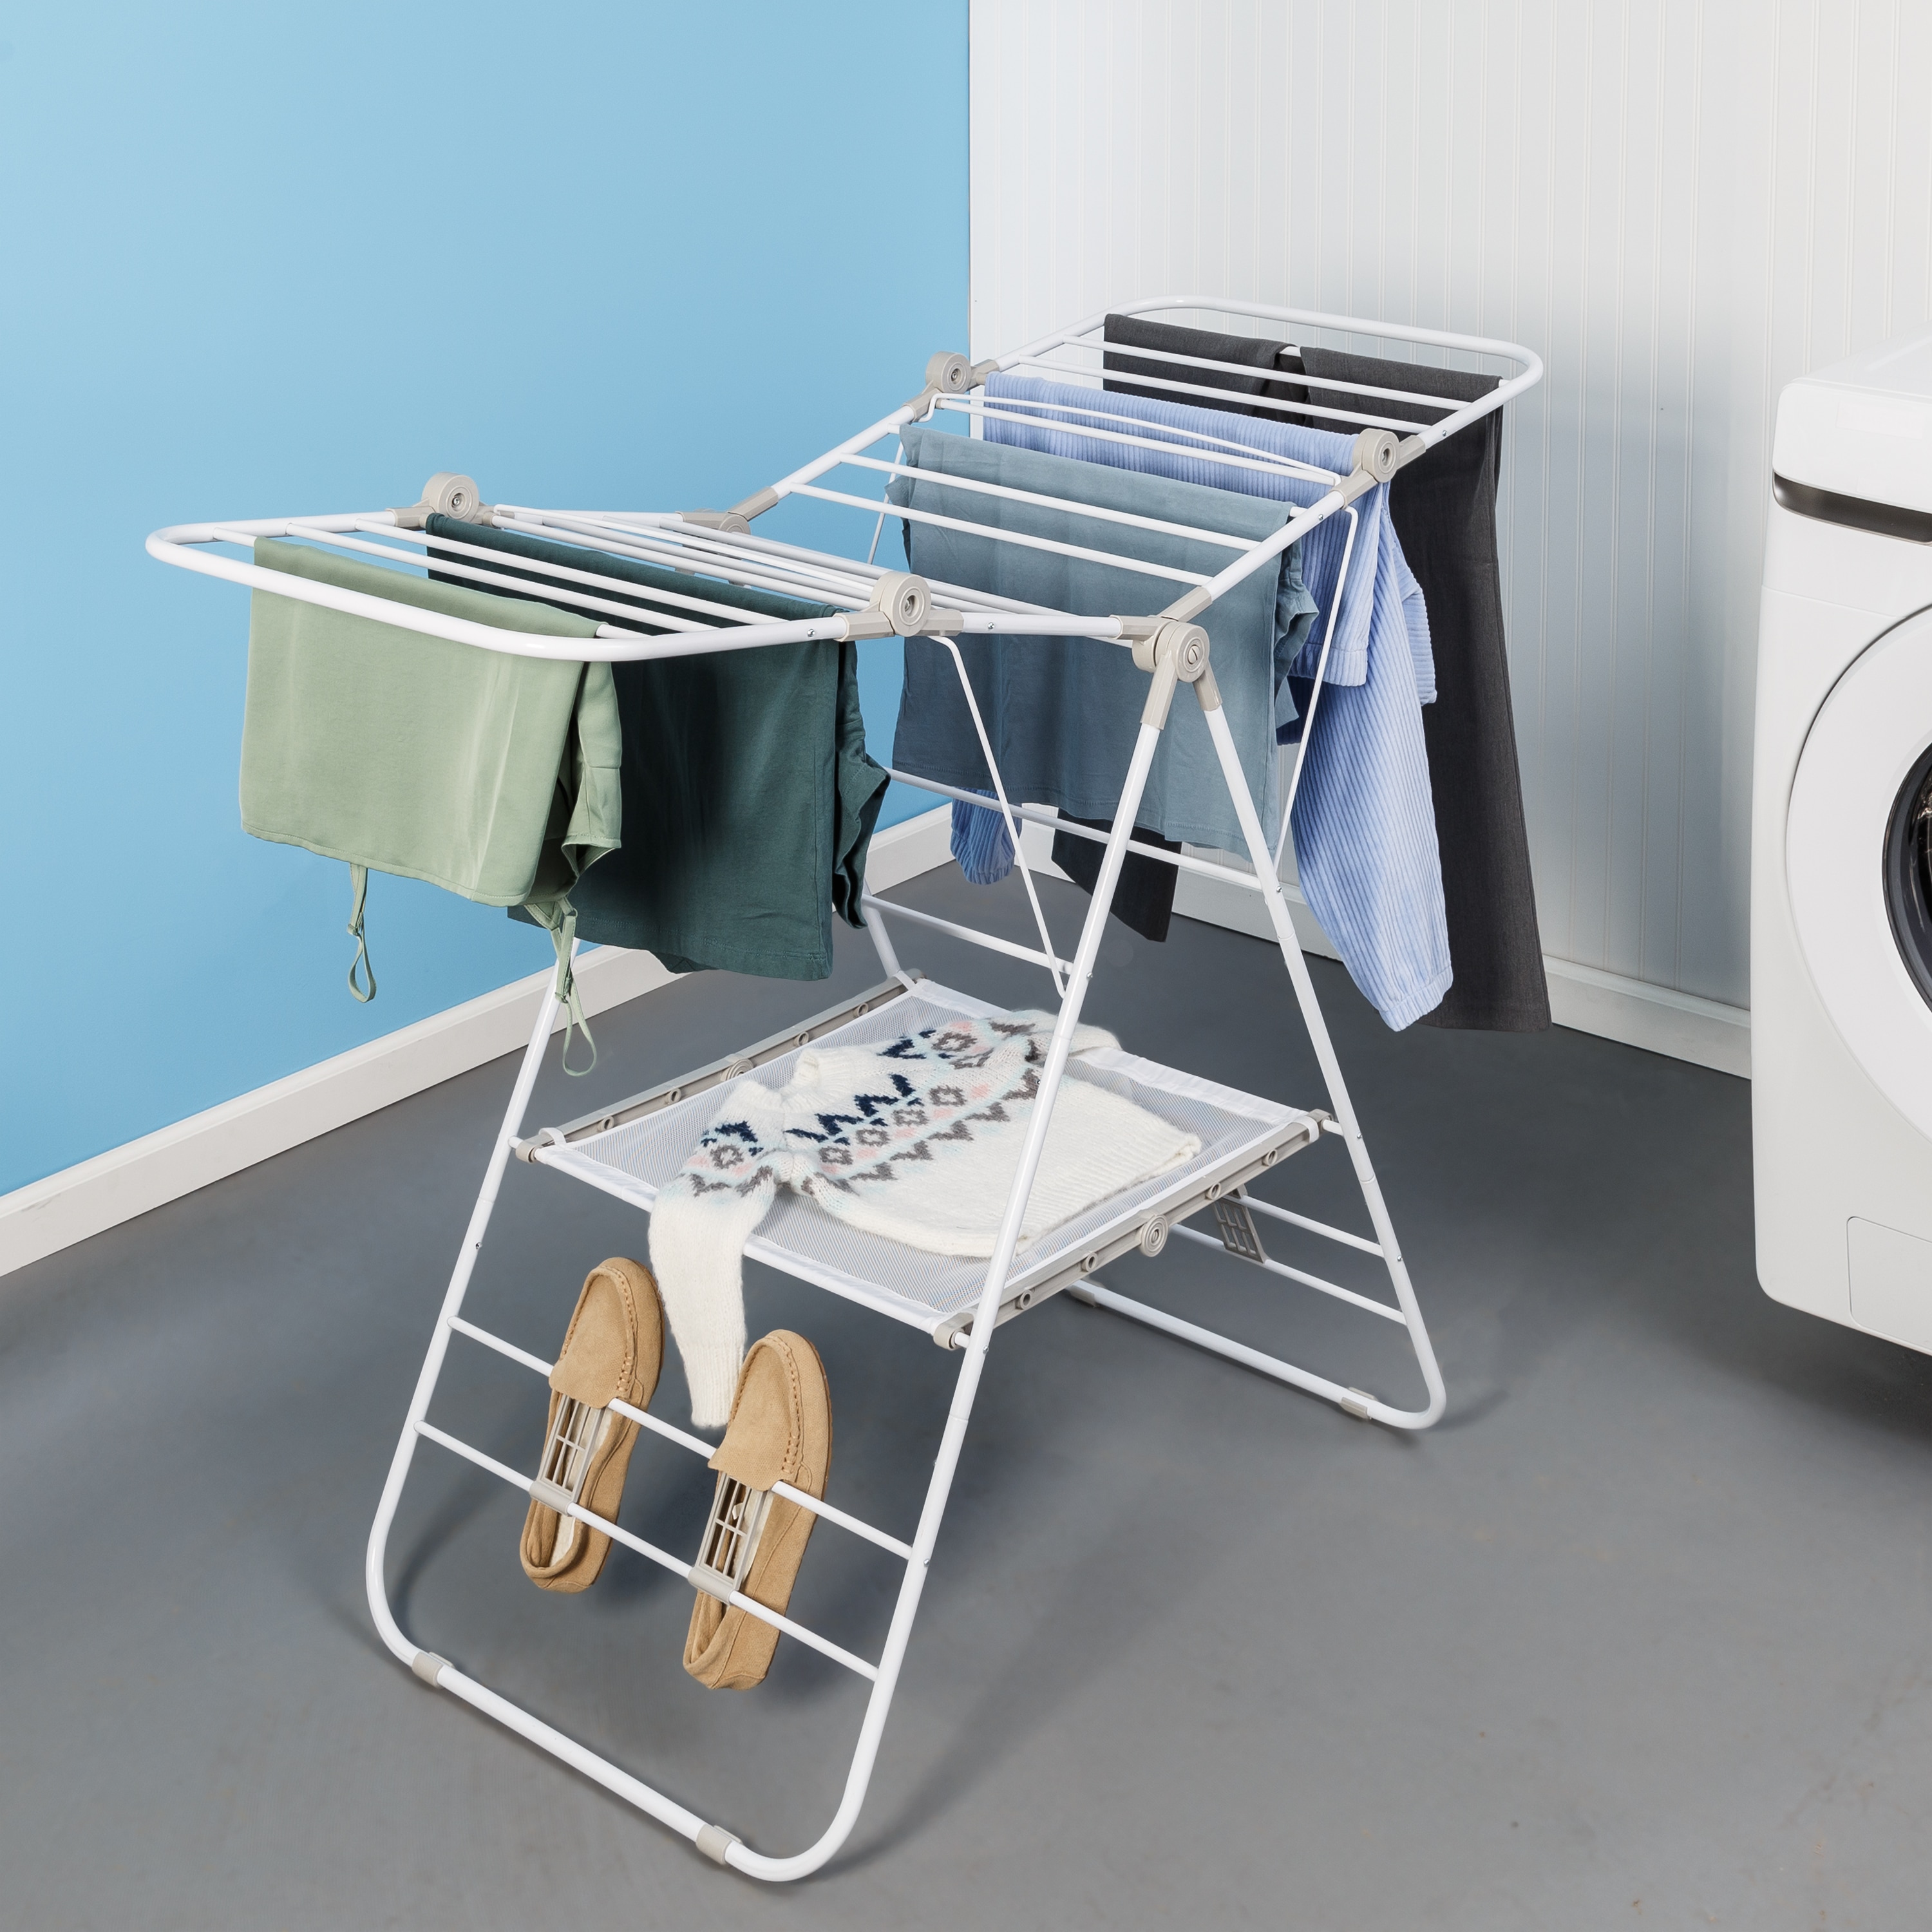 Hastings Home 4-Tier 27-in Mixed Material Drying Rack